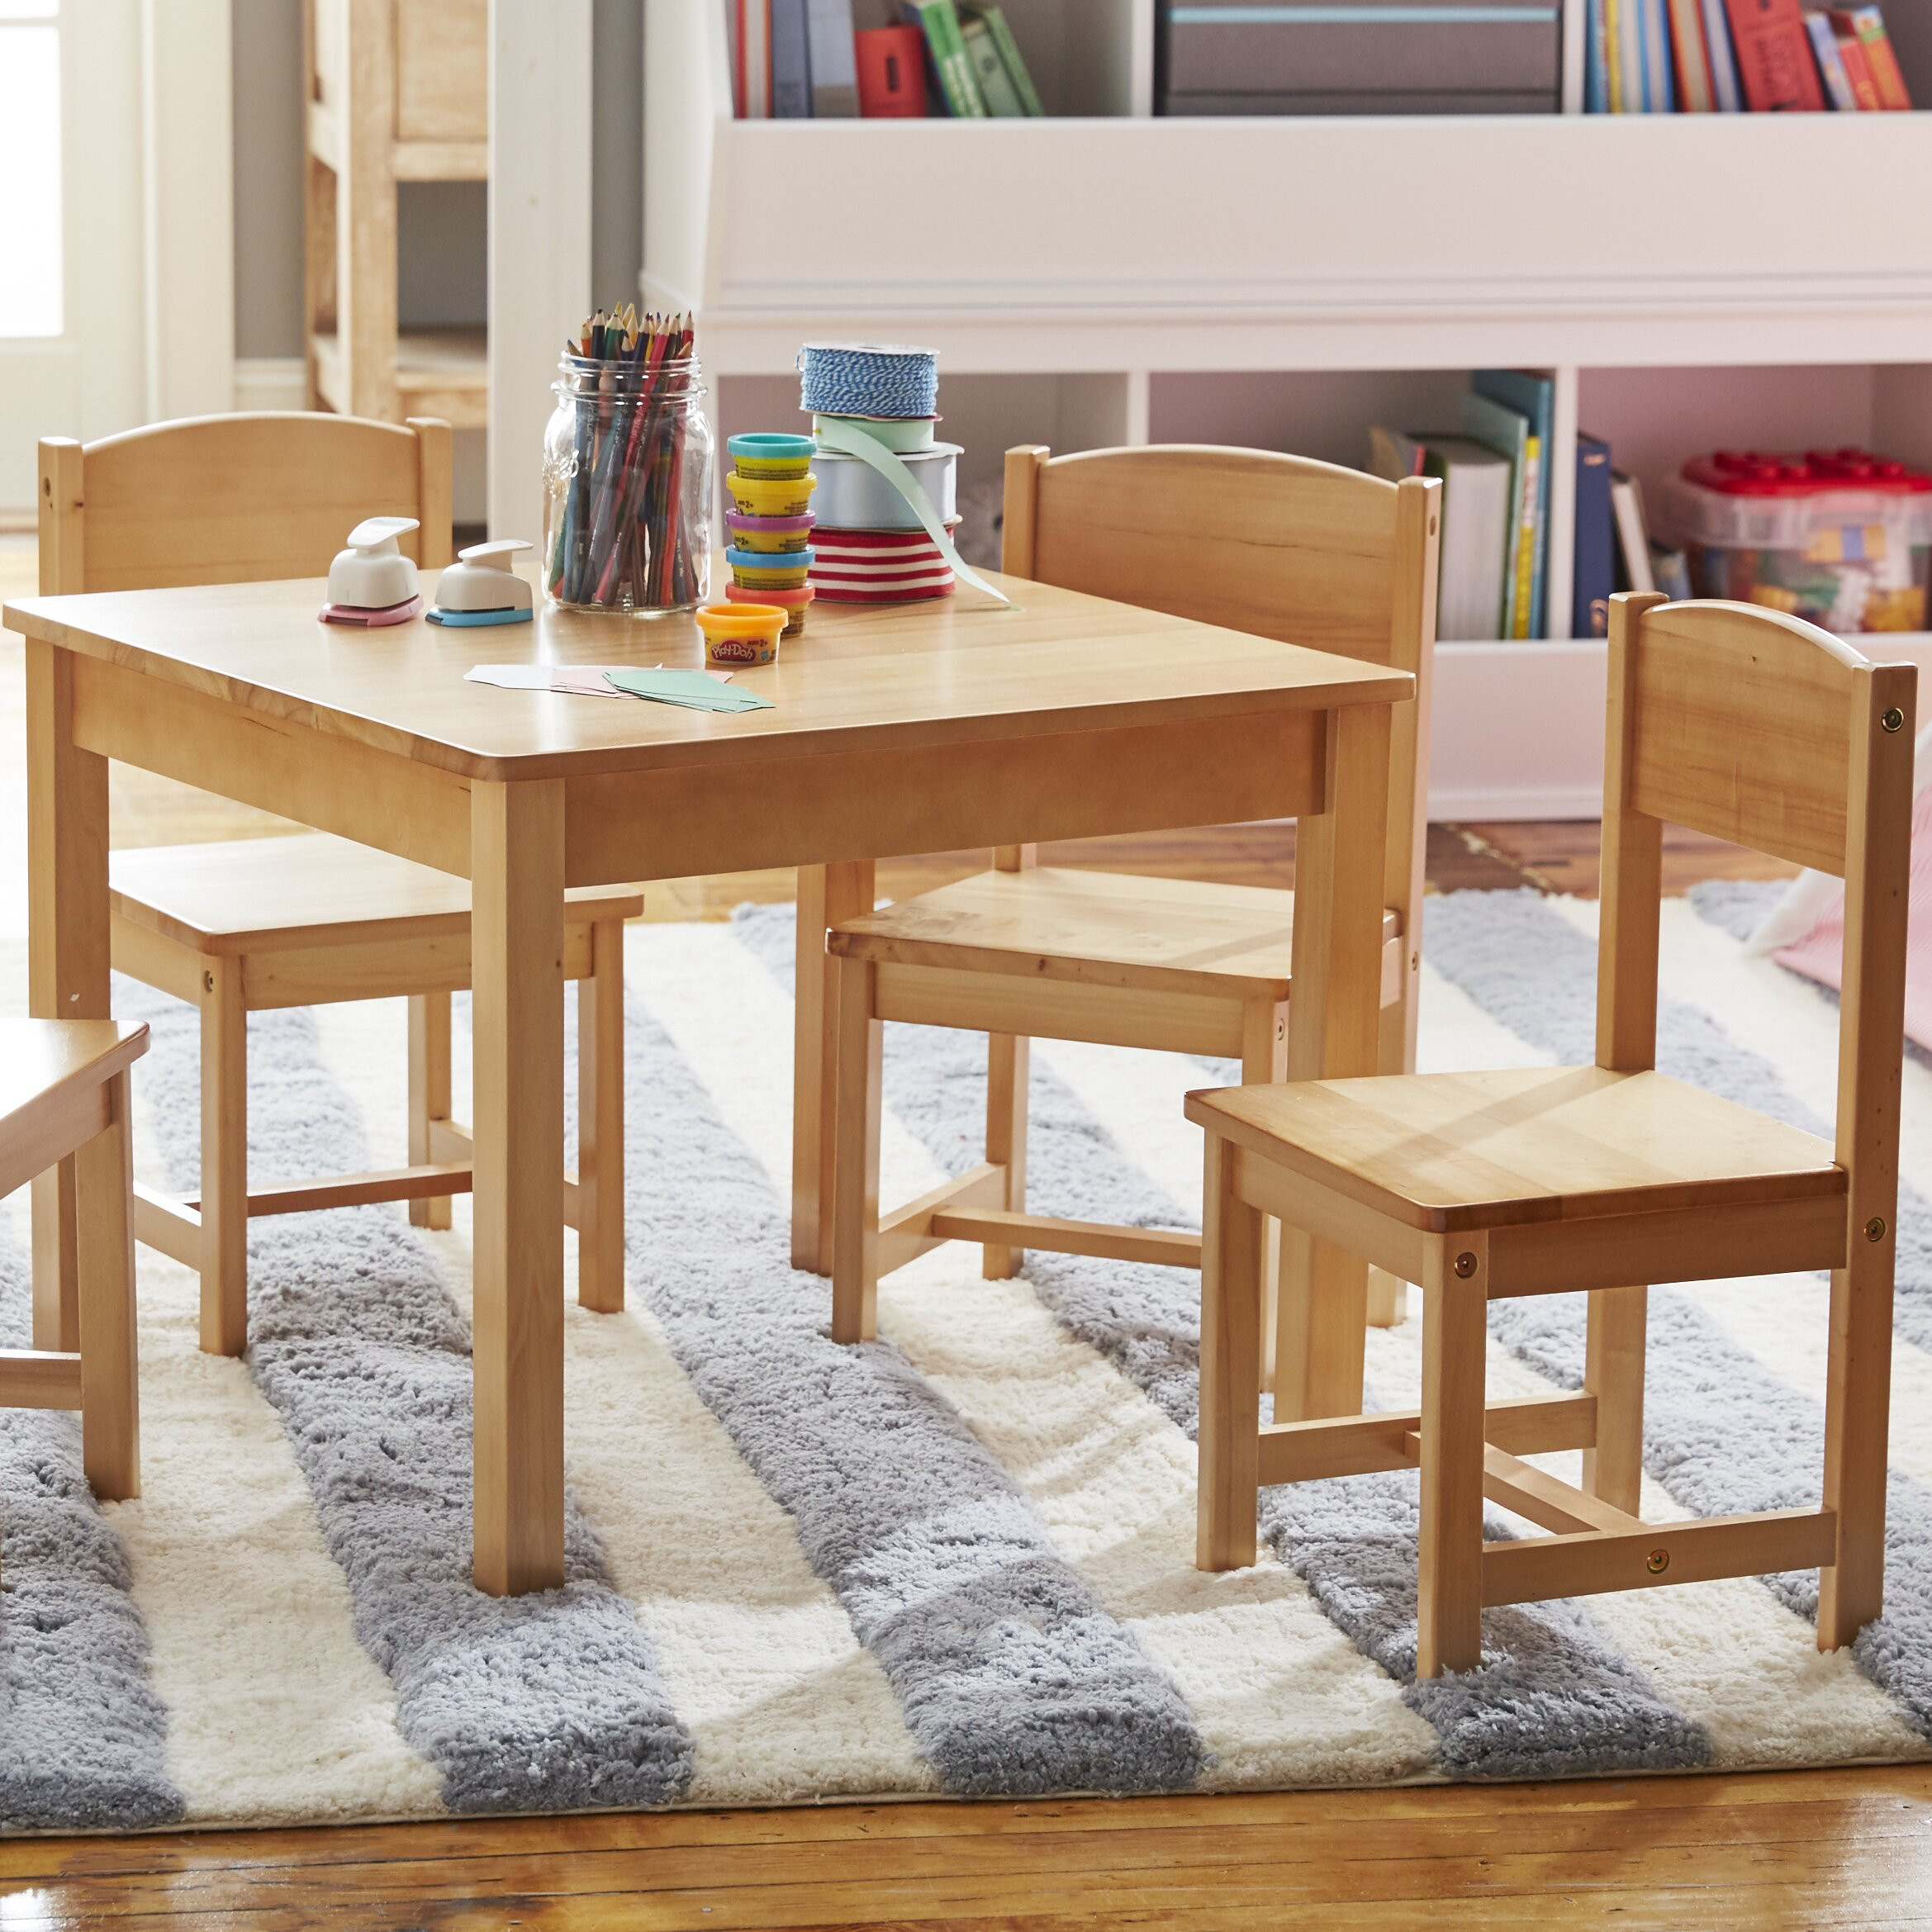 Kids Table And Chairs
 KidKraft Farmhouse Kids 5 Piece Square Table and Chair Set